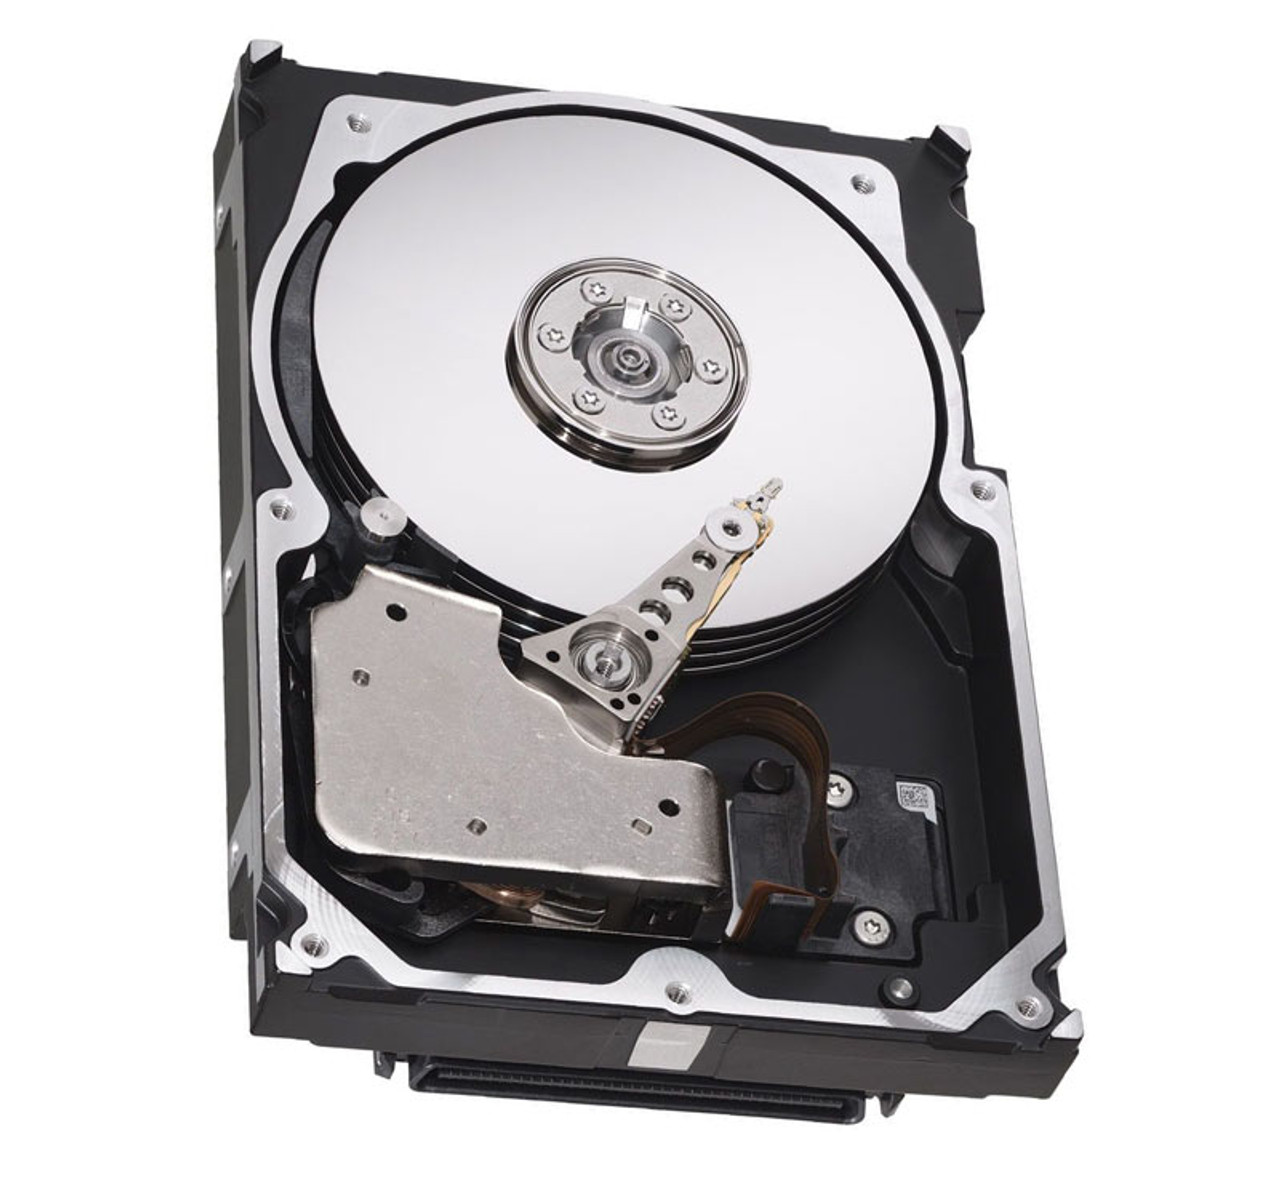 370-3716-02 - Sun 18.2GB 7200RPM Ultra-160 SCSIHot-Pluggable Single-Ended 80-Pin 3.5-inch Hard Drive